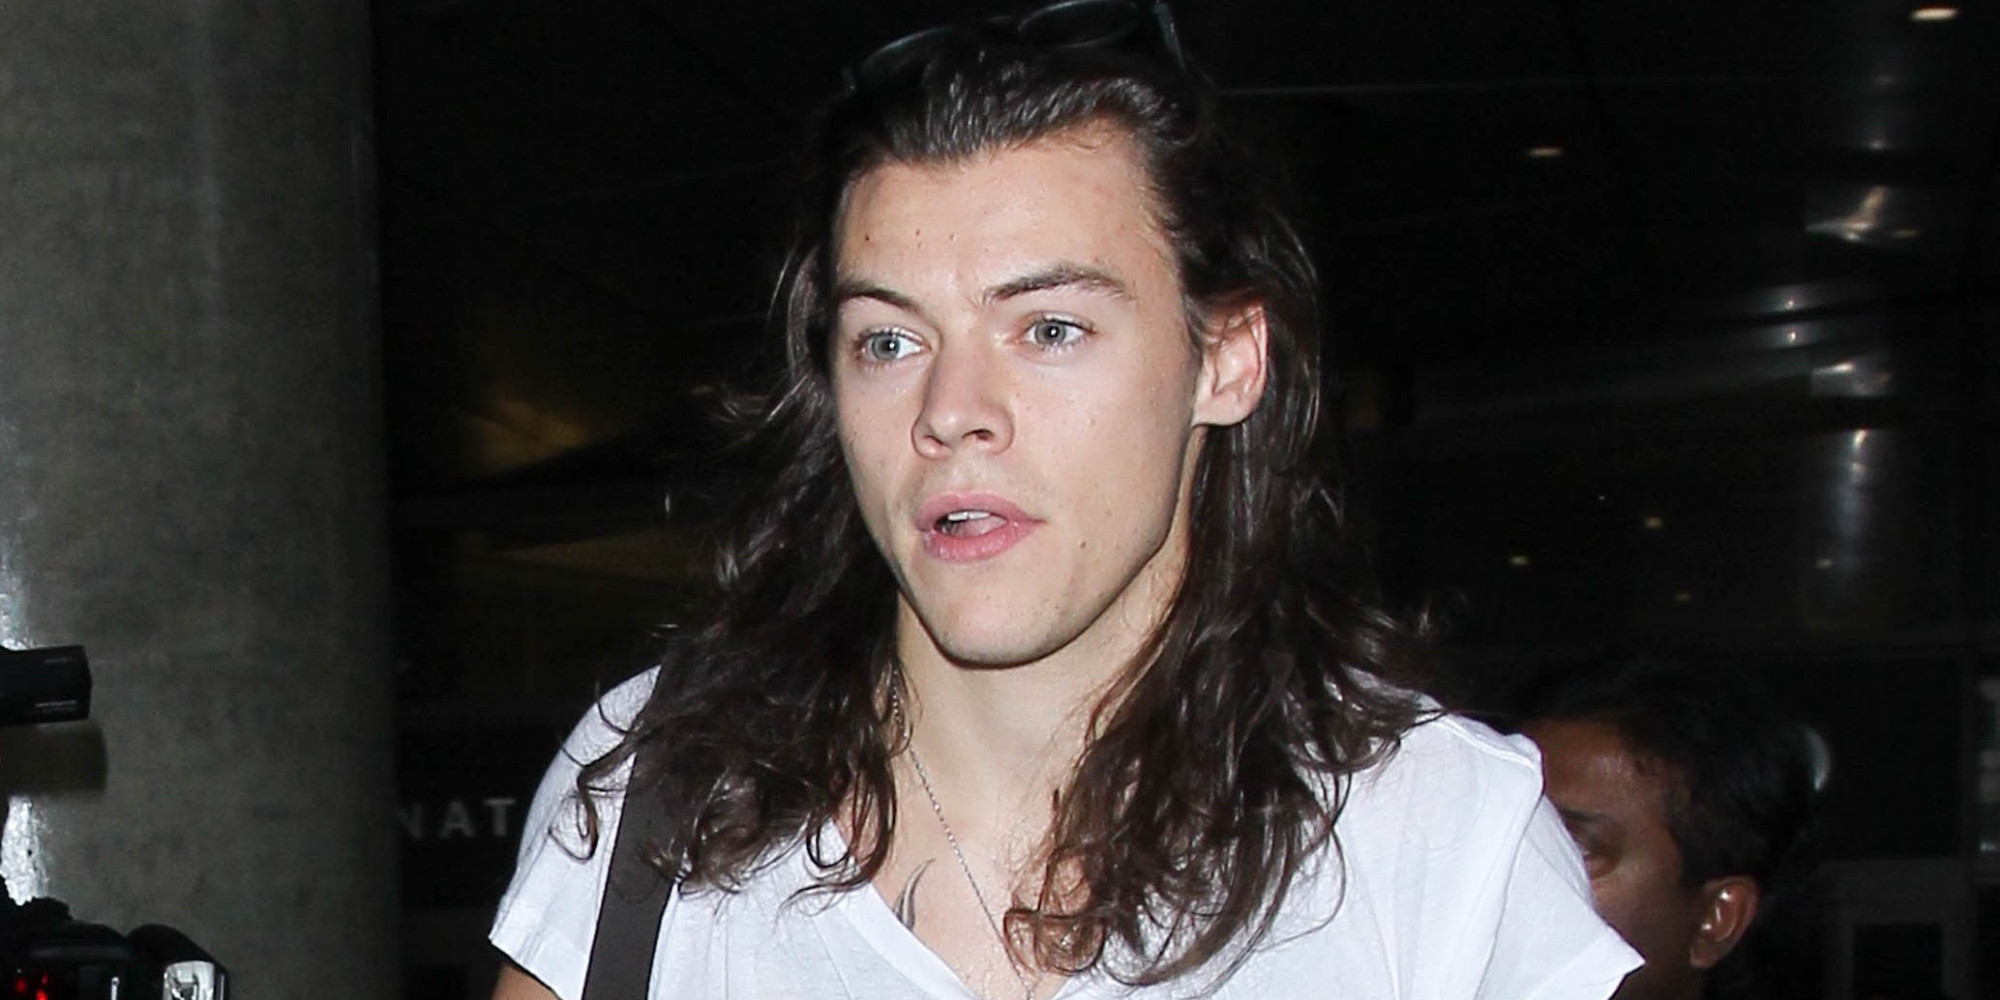 Harry Styles Cut Off His Hair And People Are Losing Their Minds